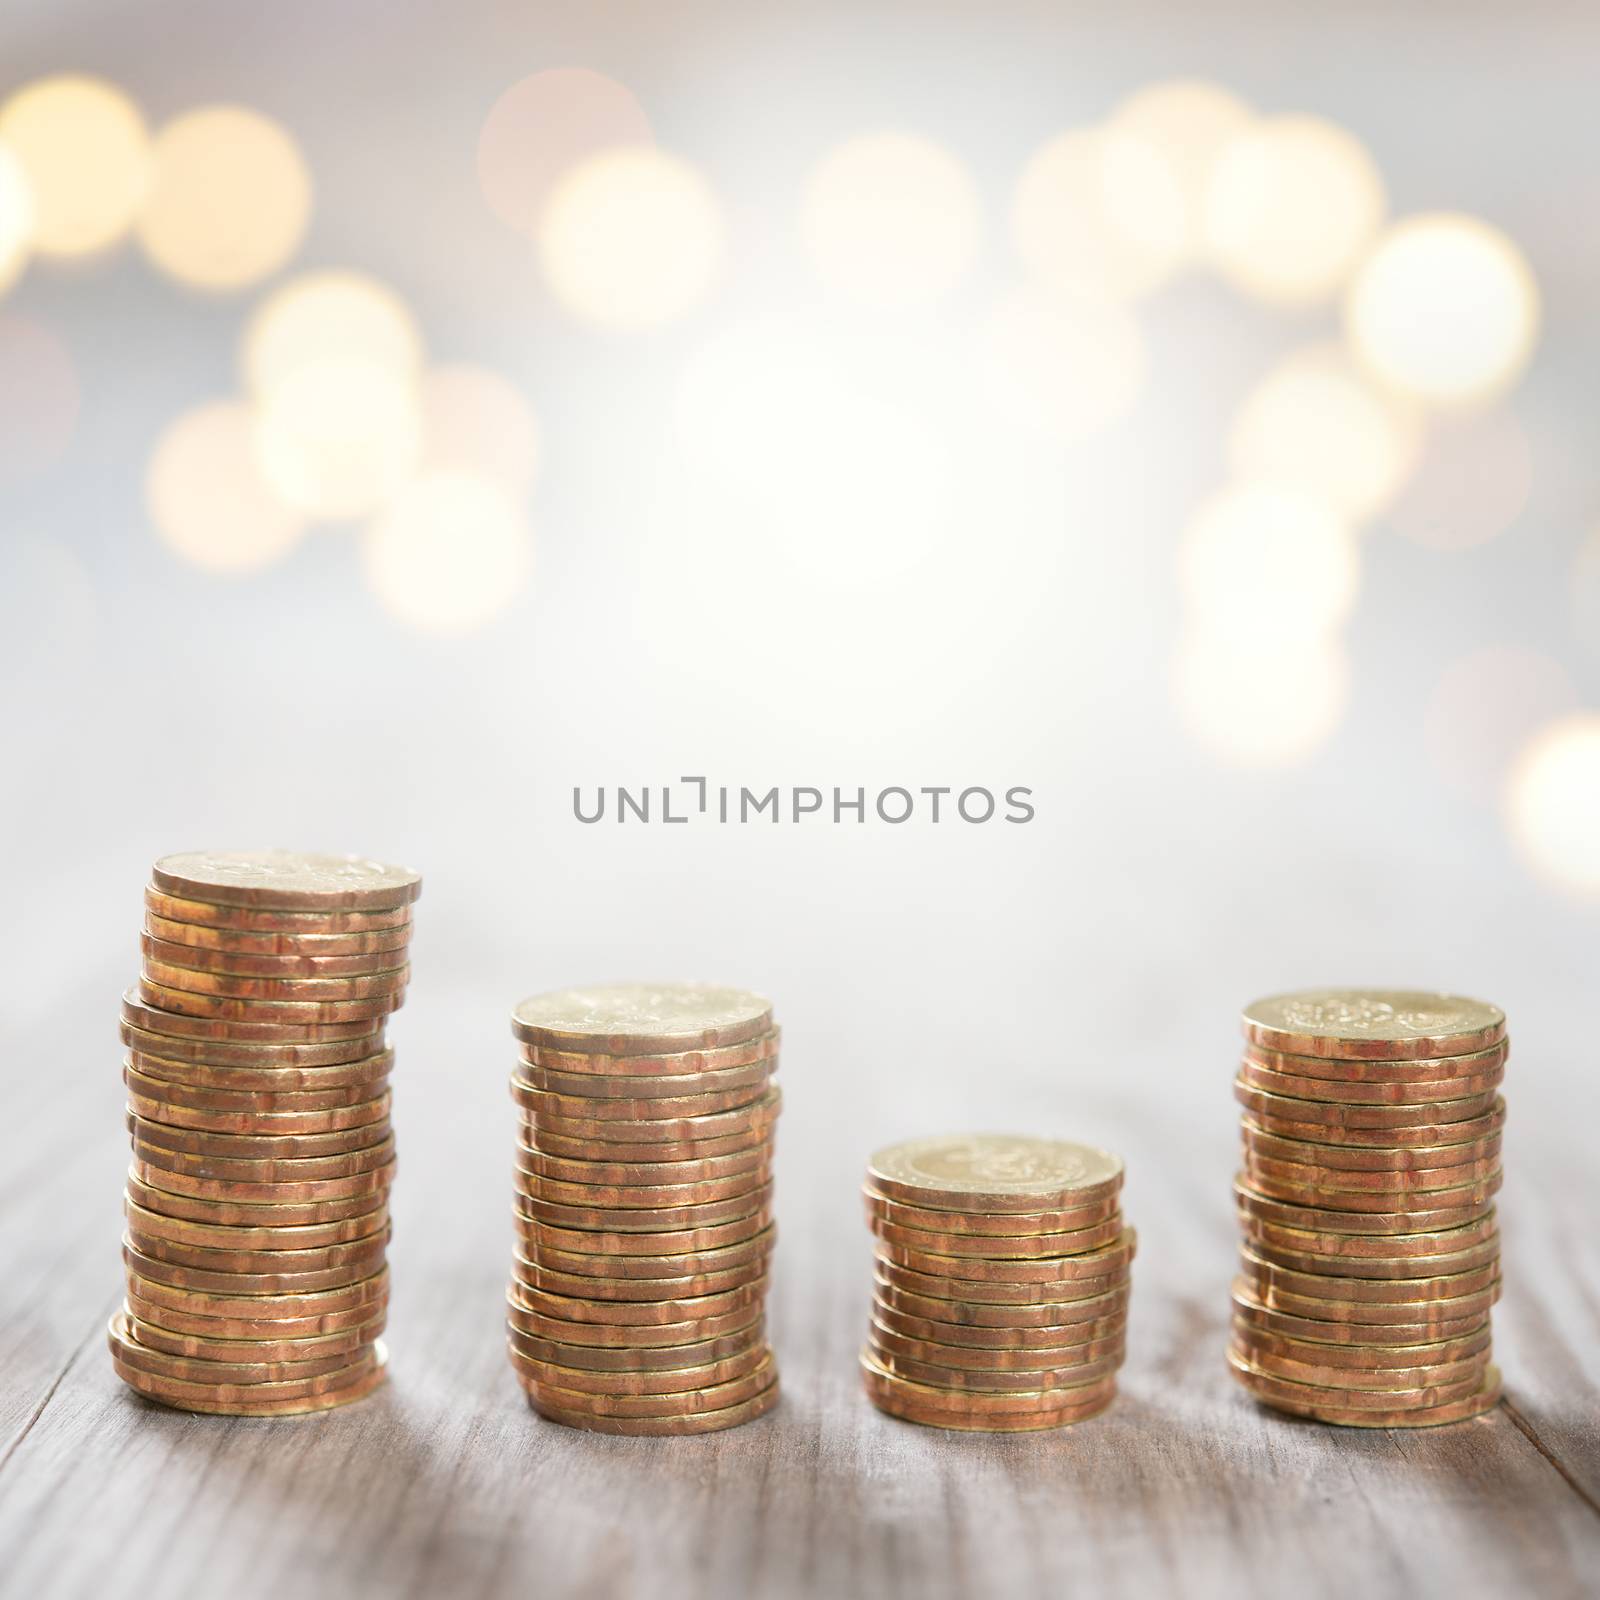 Coins stack in row on wooden background, financial concept. Focus on foreground with blur shinny background.